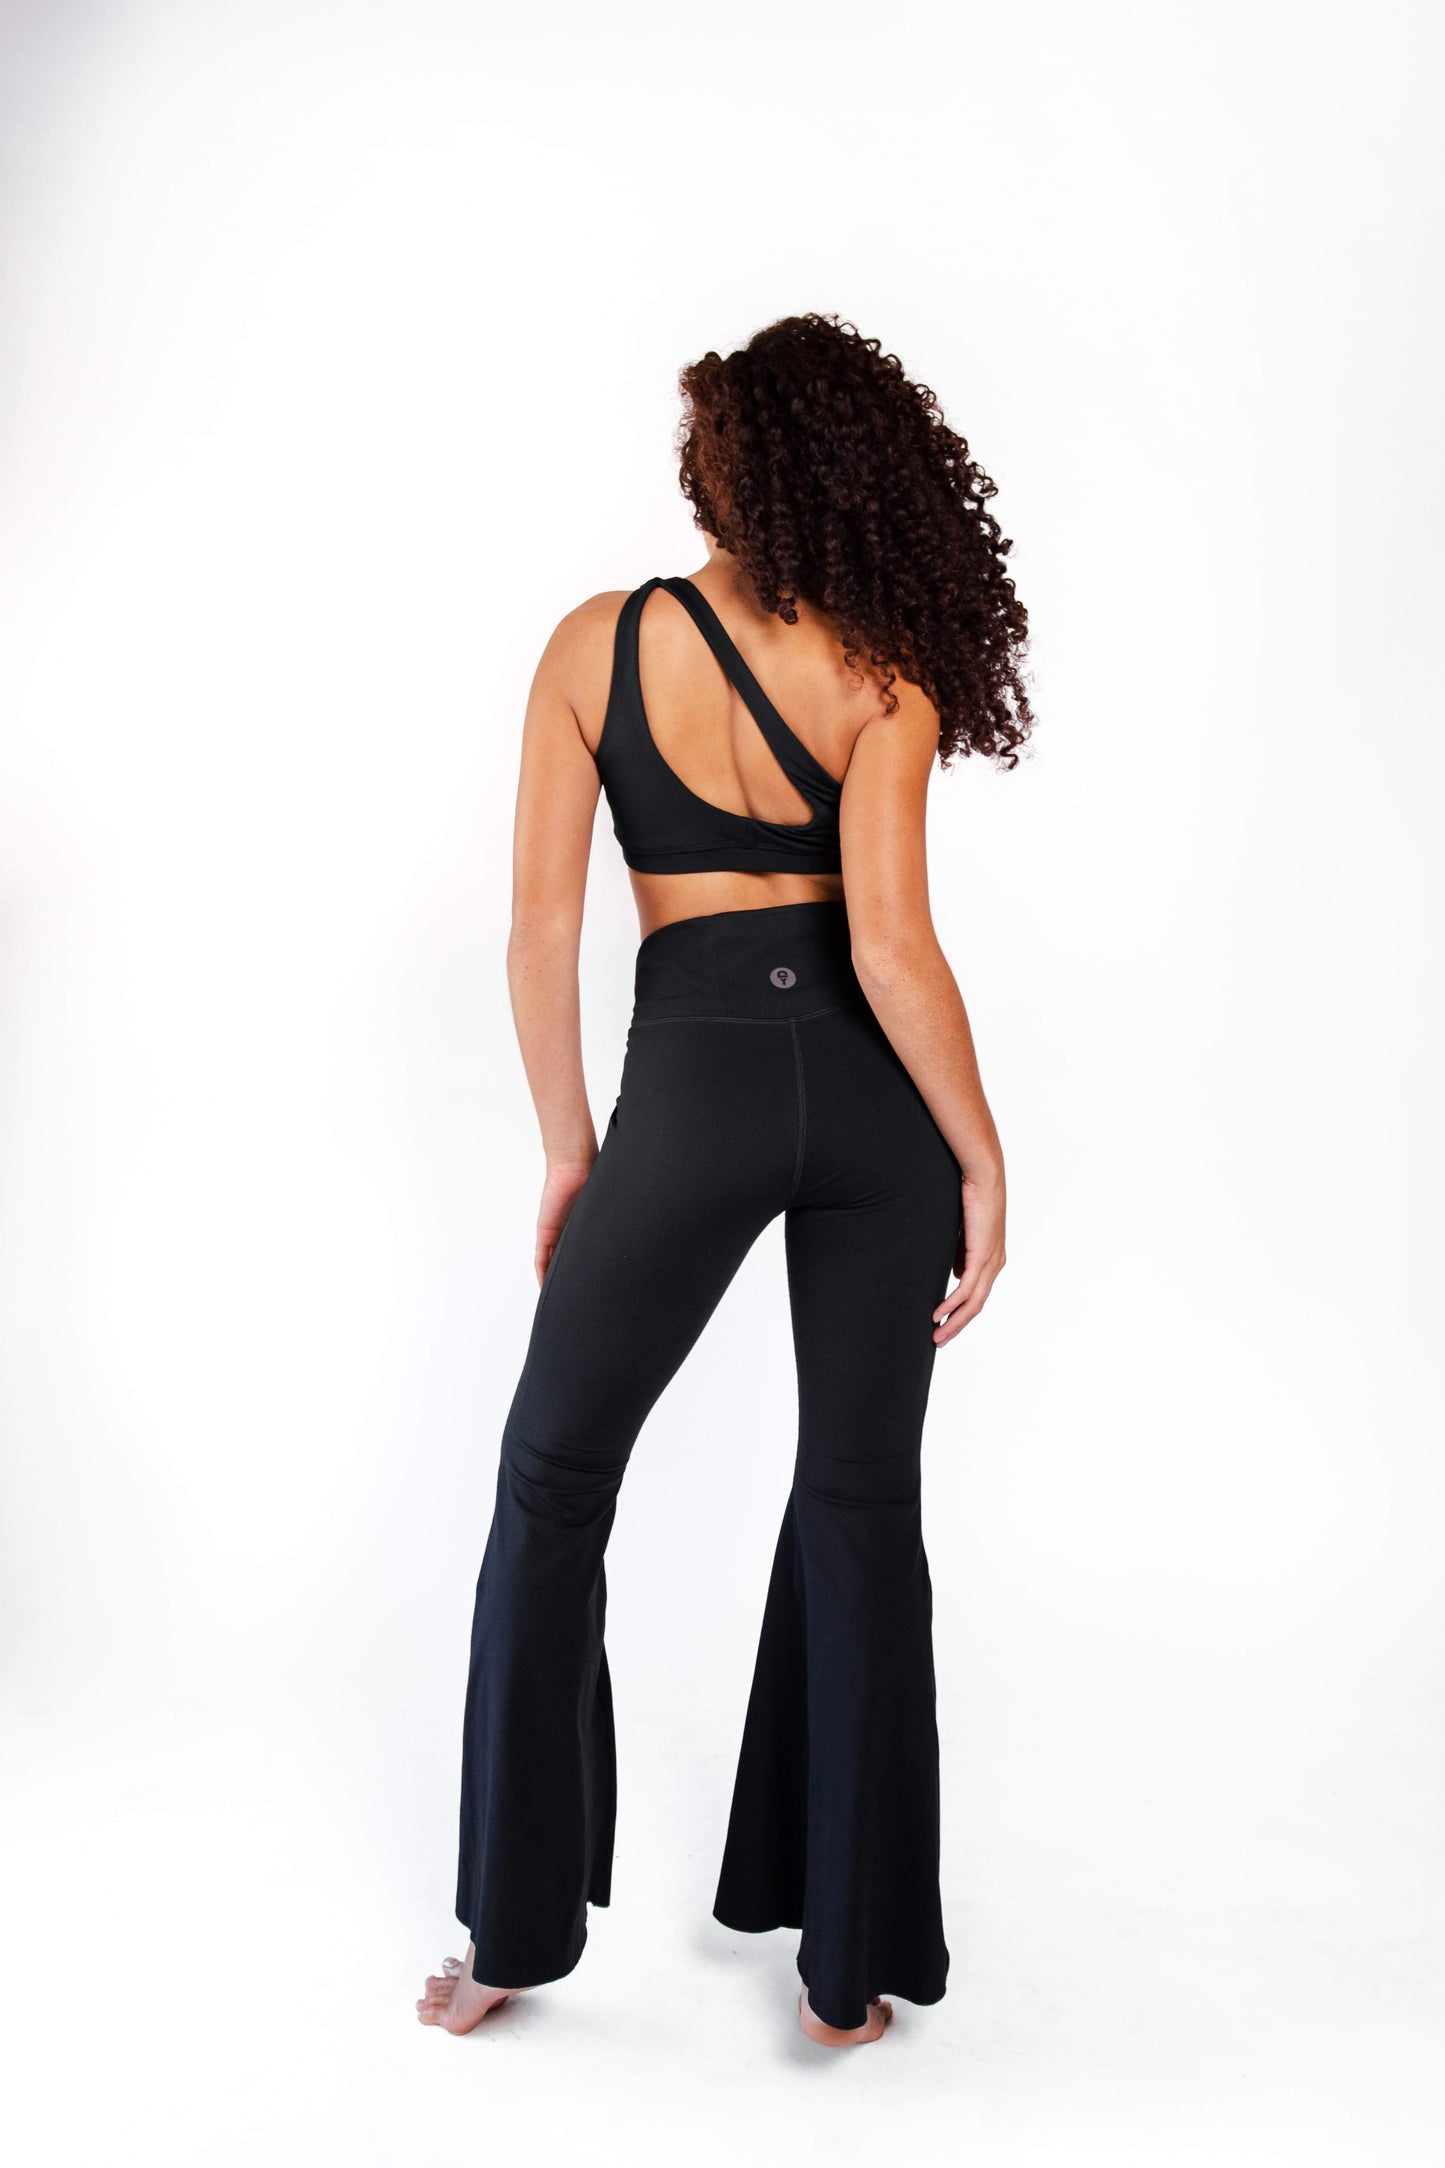 Bell Bottoms 2.0 in Jet Black by Yoga Democracy